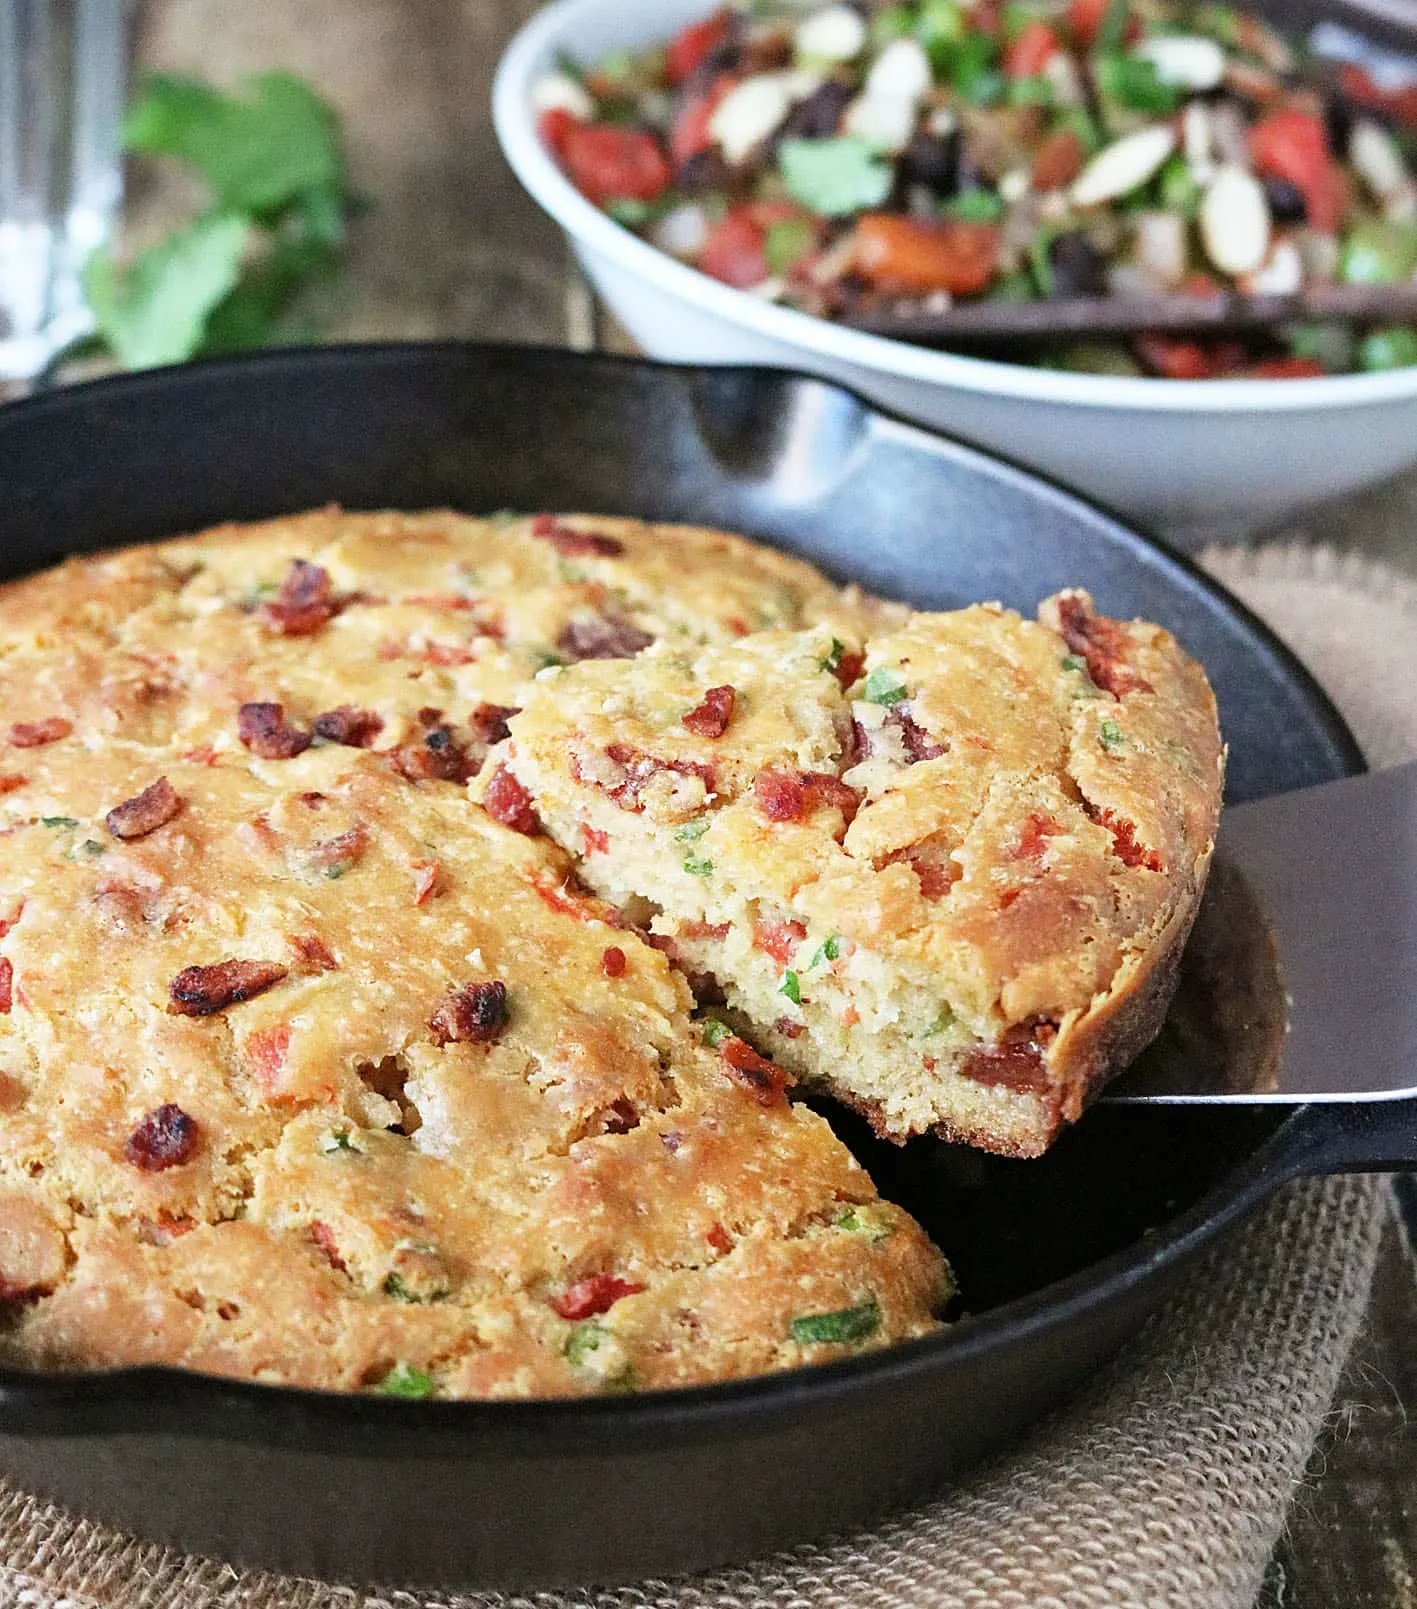 Tomato Bacon Skillet Bread that happens to be gluten free!